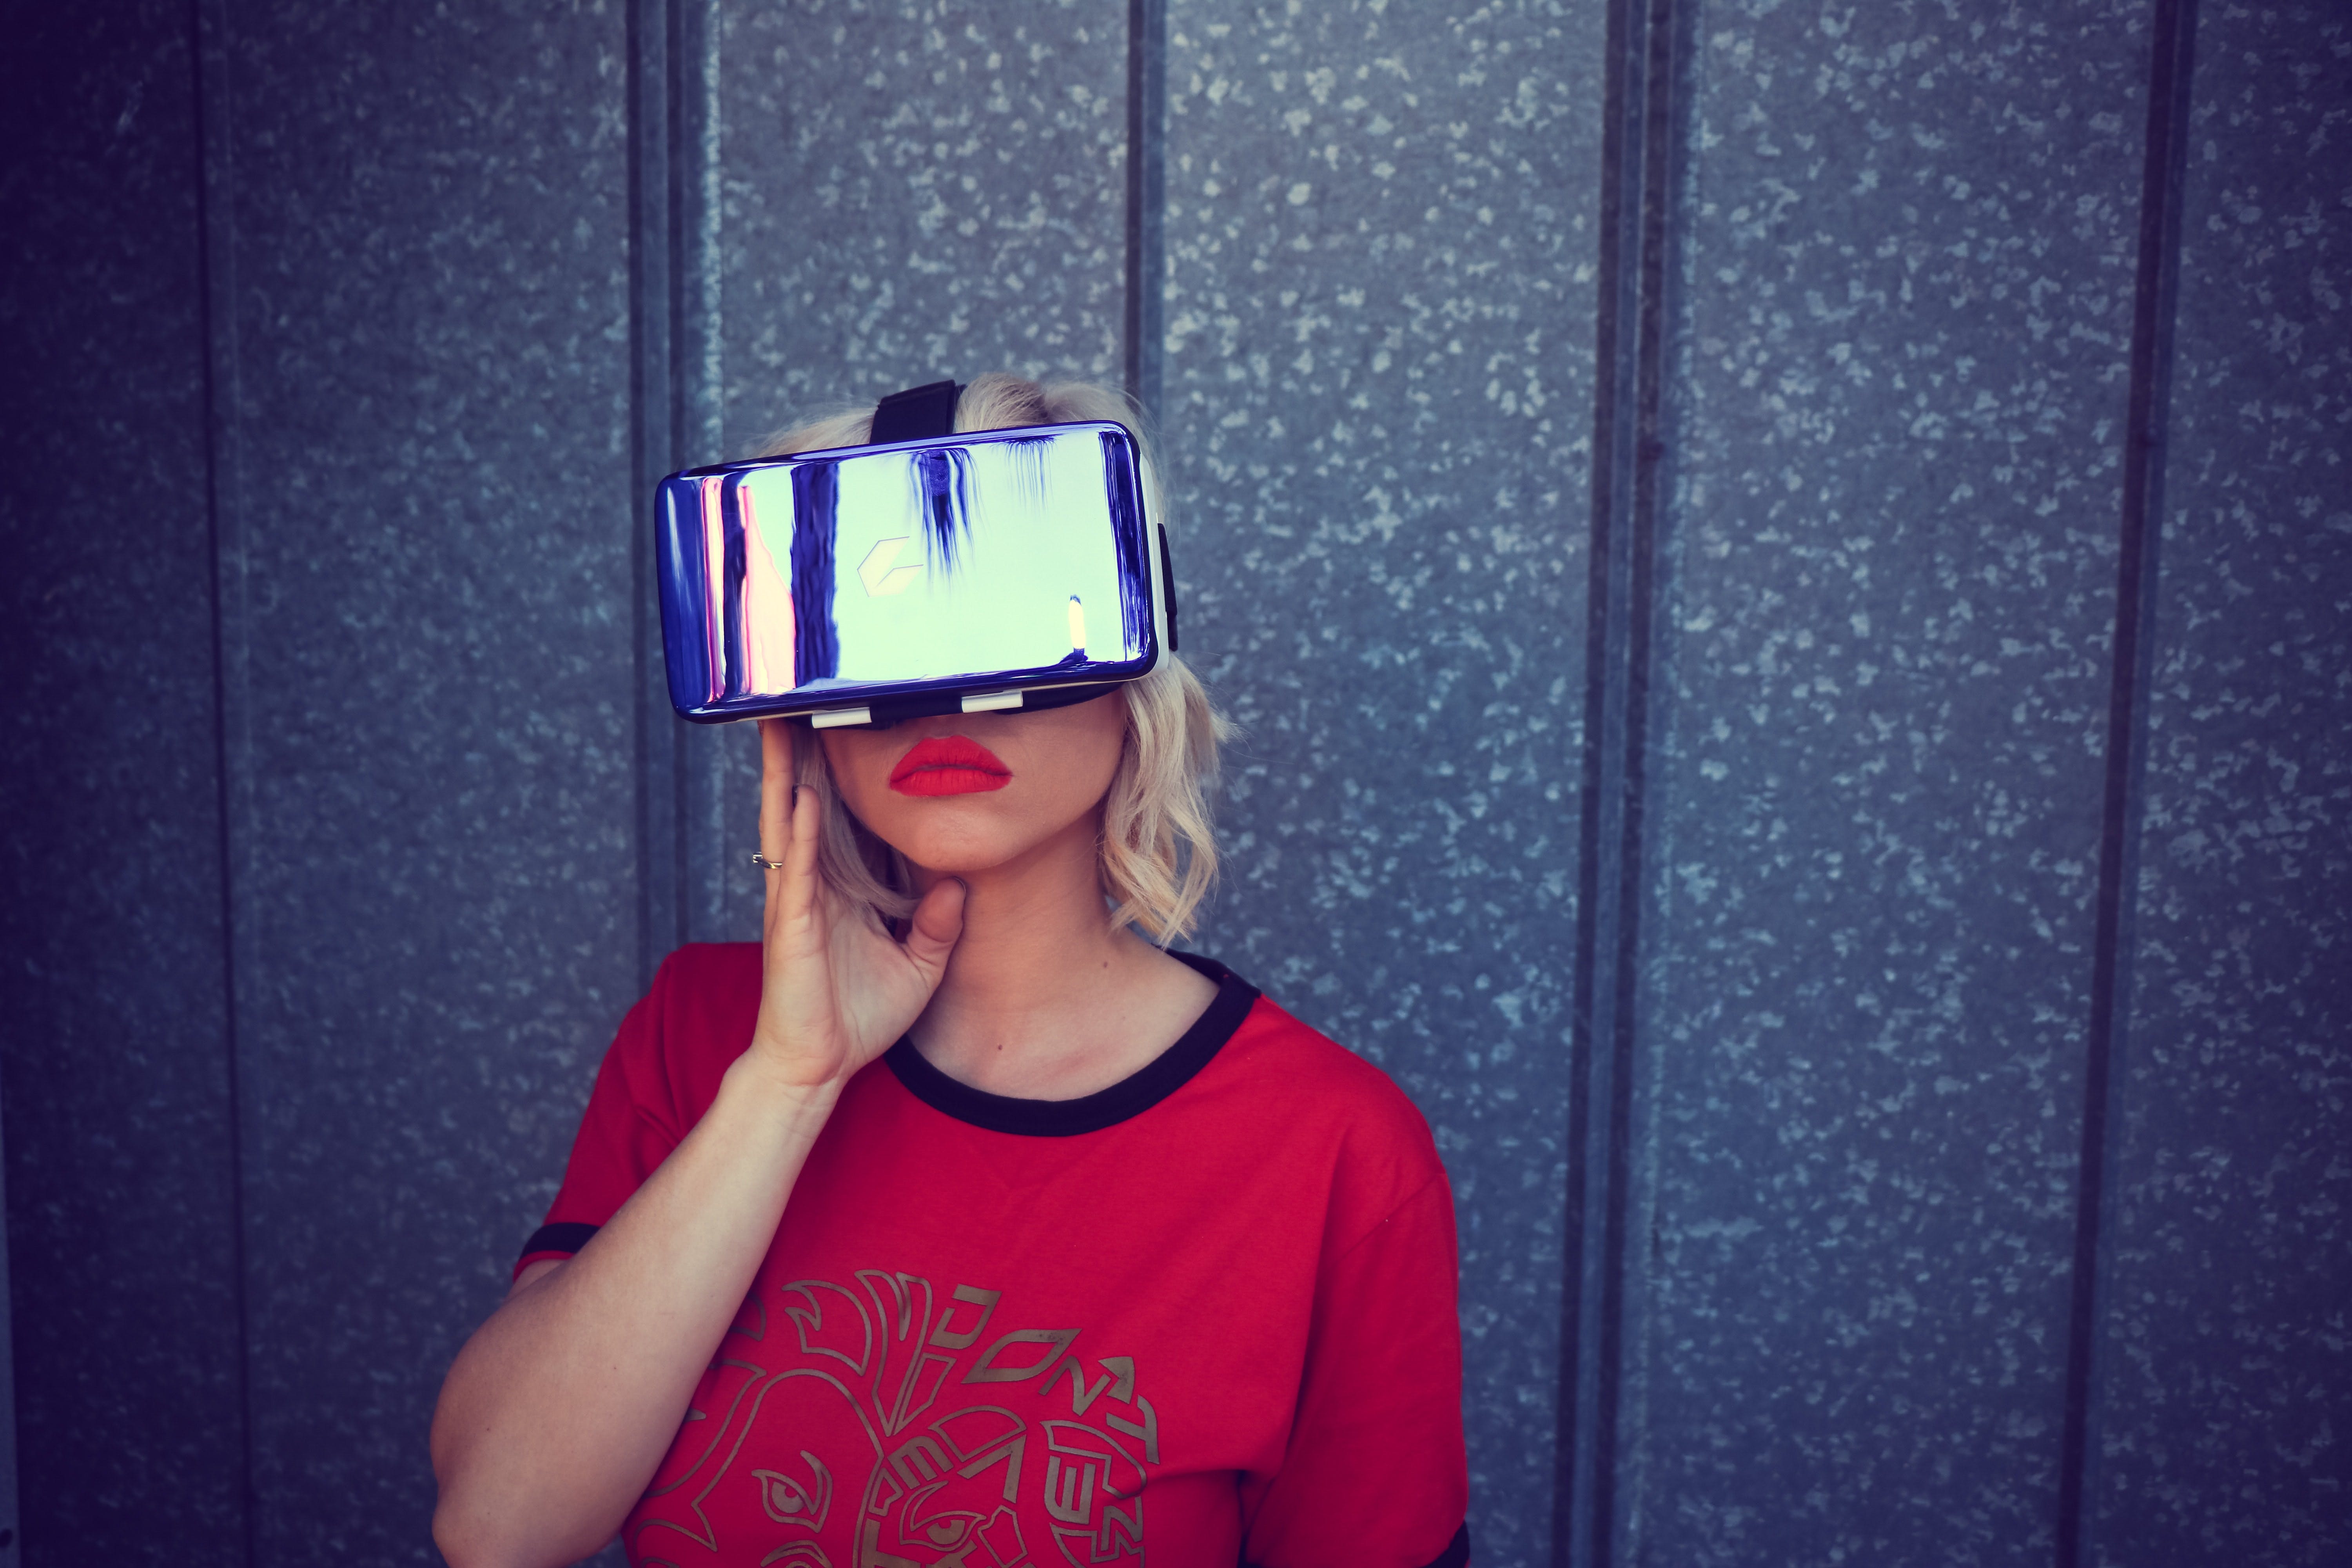 A girl with red sweater and lipstick are wearing a VR-headset and posing